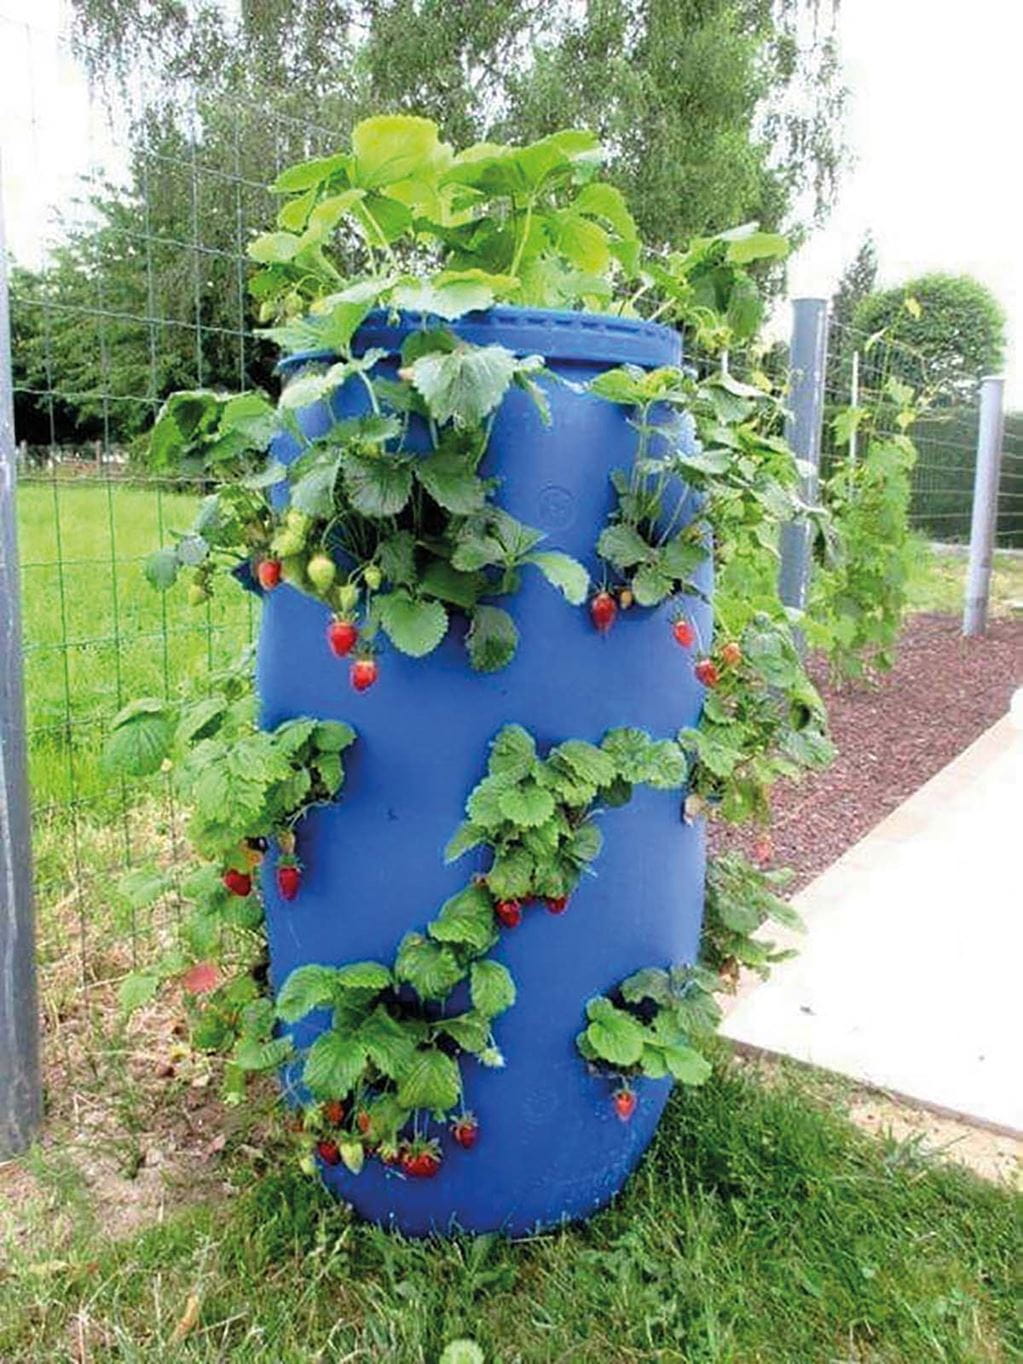 Hydroponic plants can be grown simply using locally available materials such as water barrels and plastic pipes. Photo: Vintage Greens Ltd, Latia Resource Centre